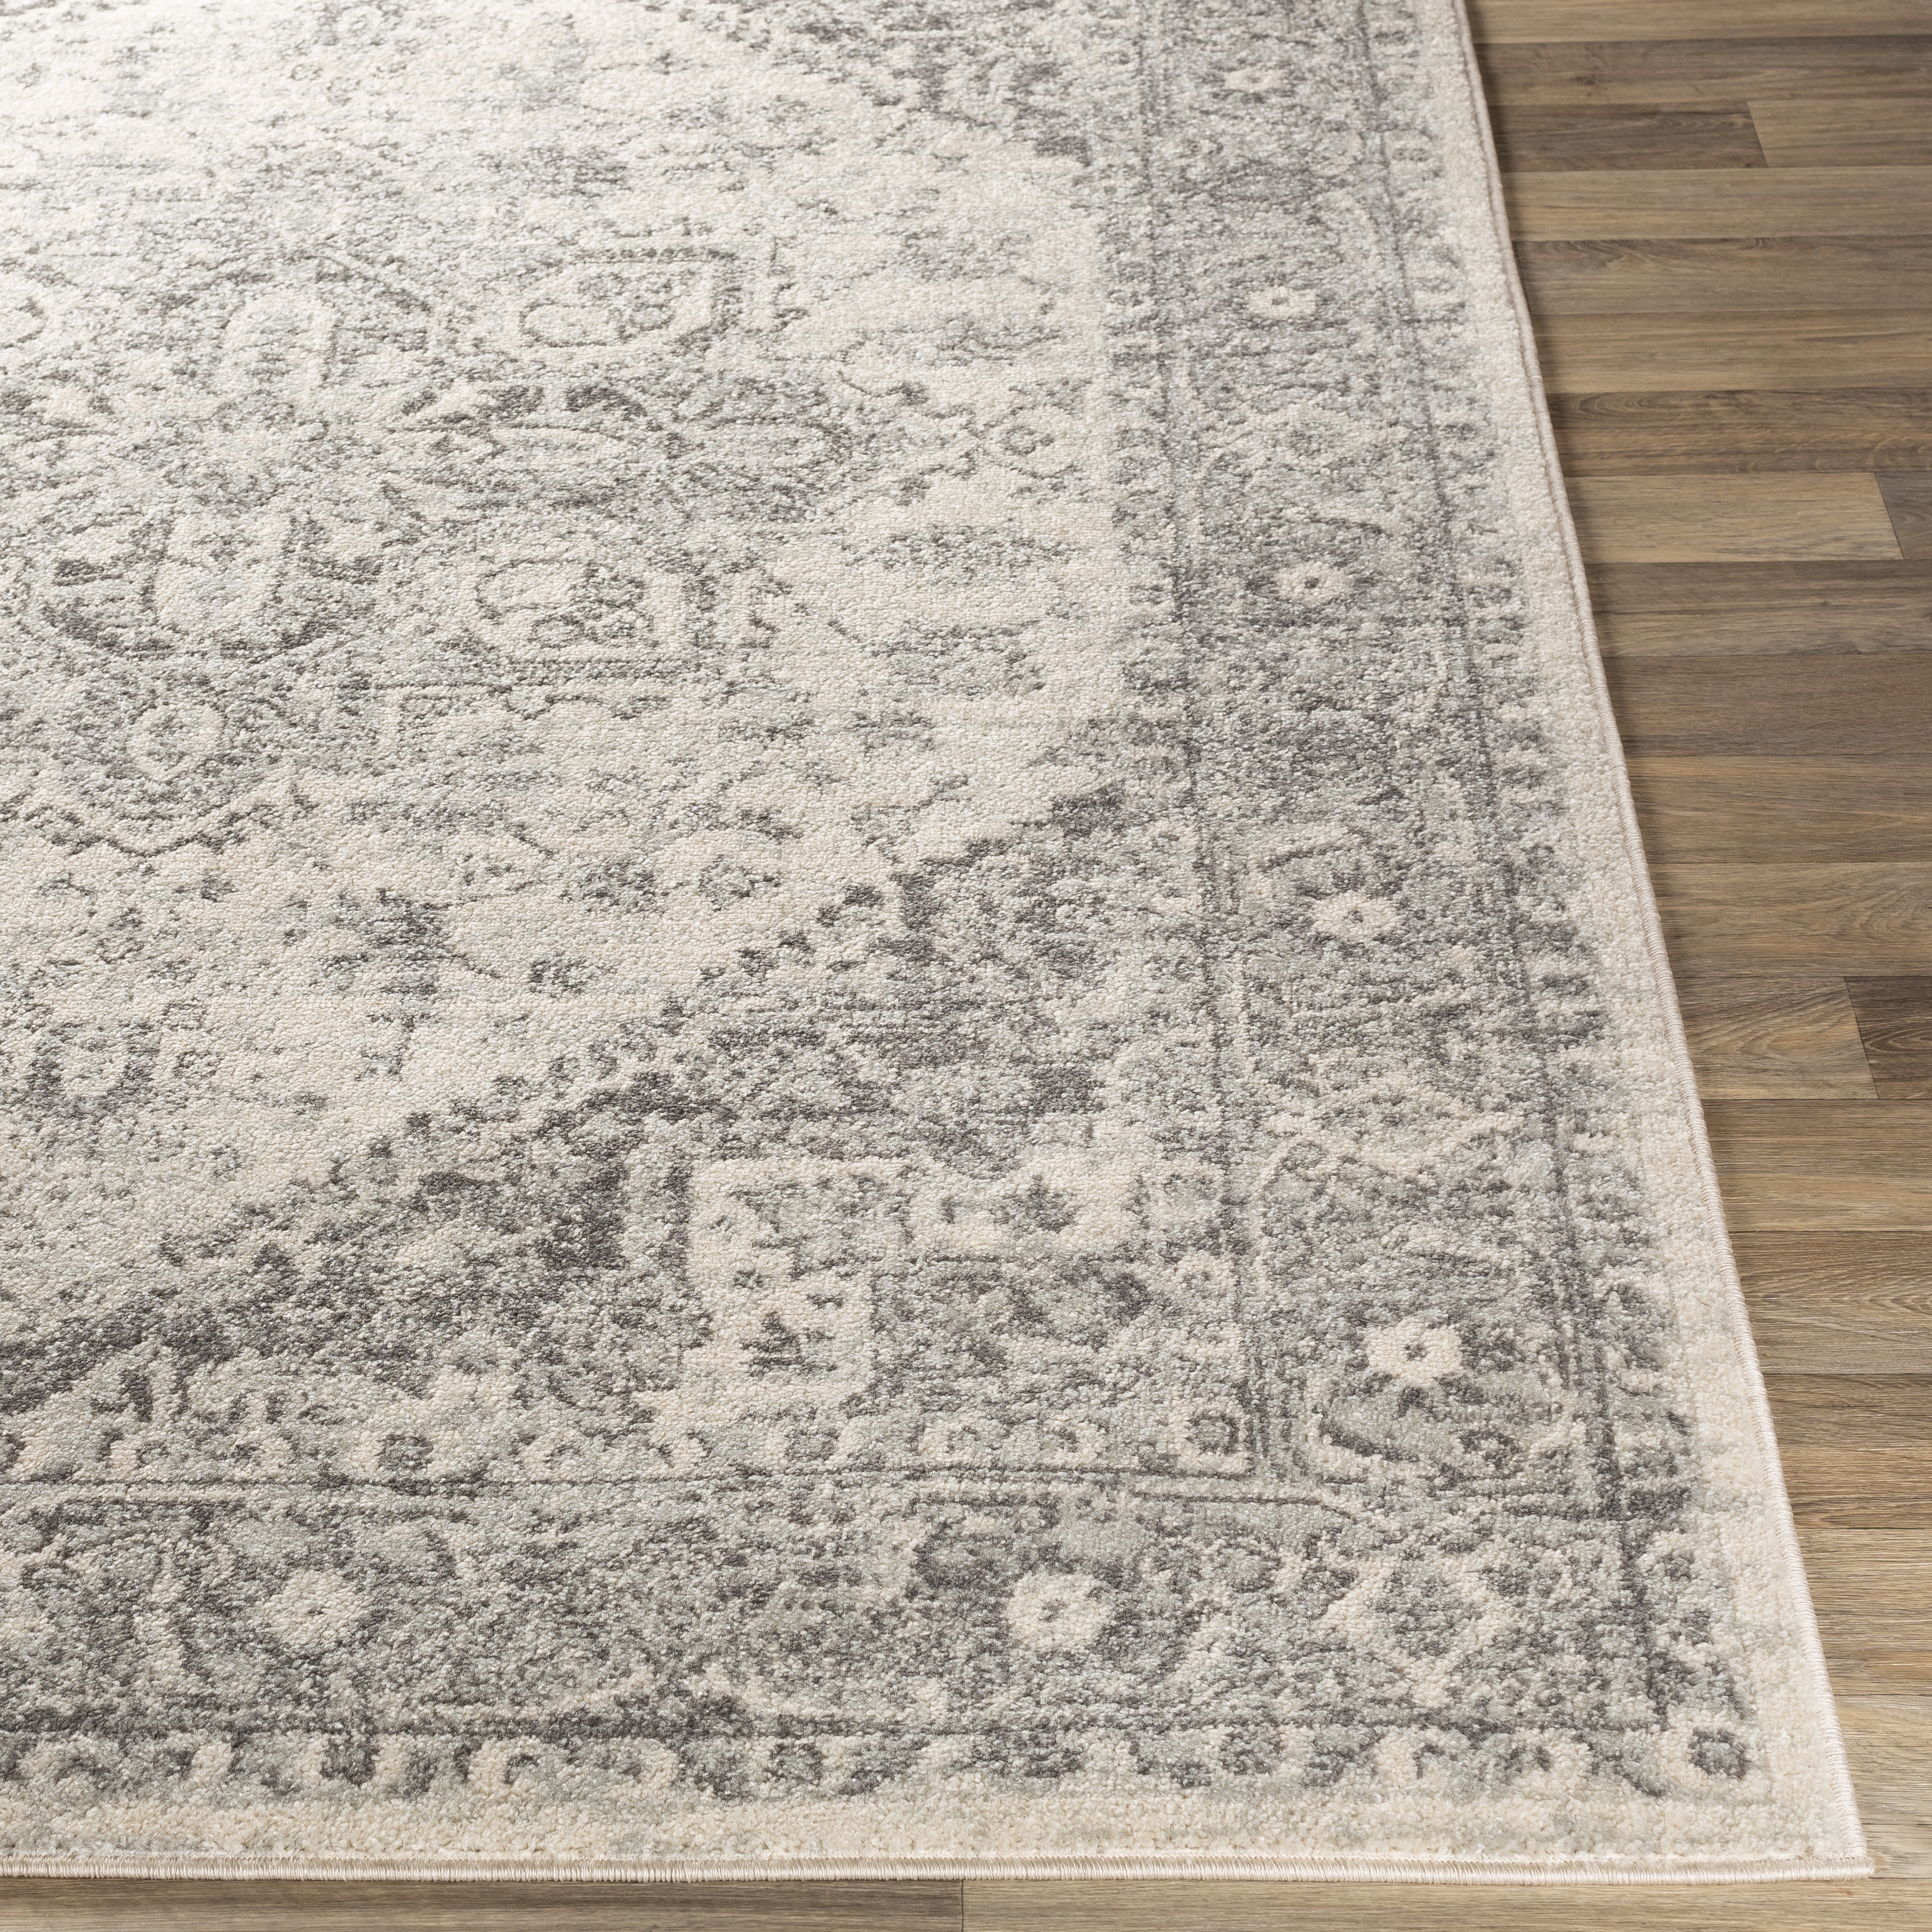 Chester Rug, 6'7" x 9' - Image 2